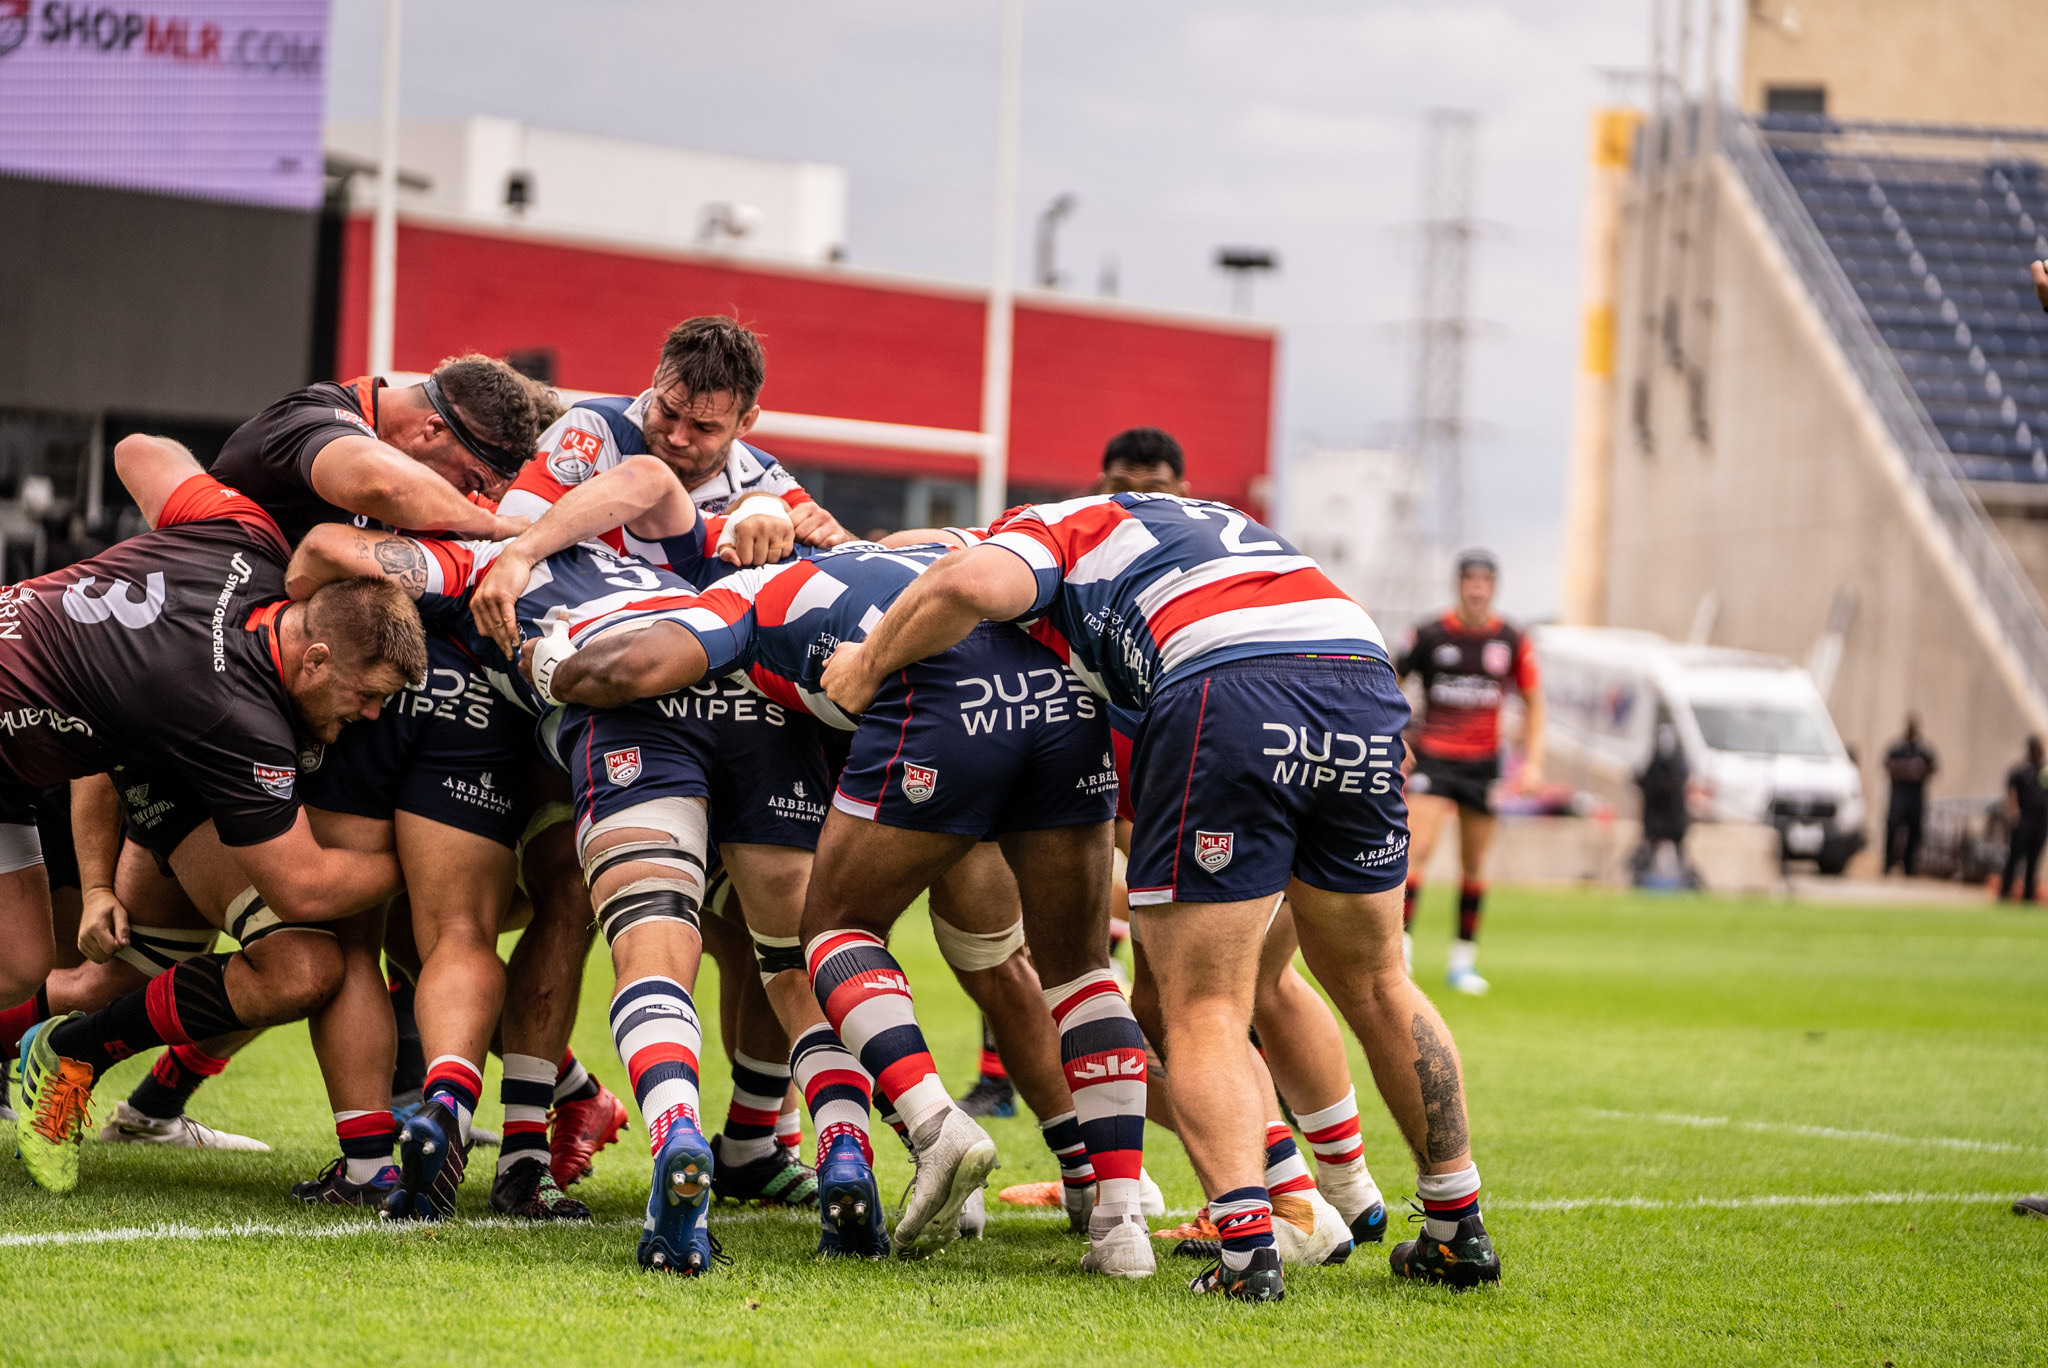 New England Free Jacks capture first Major League Rugby title in franchise history